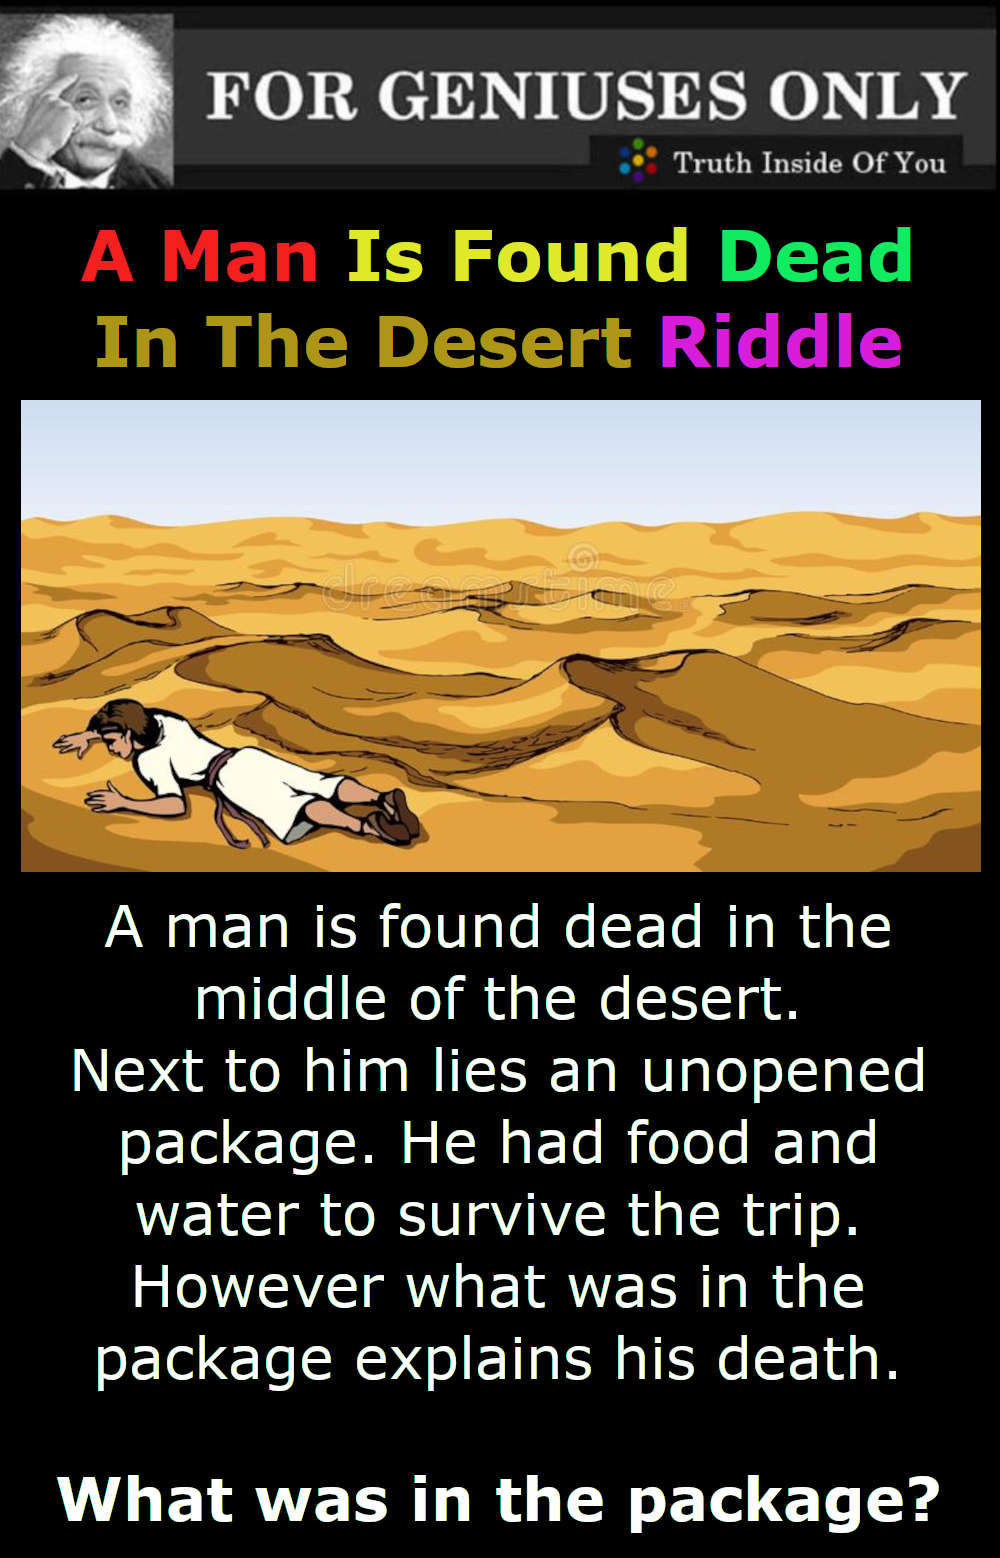 A Man Is Found Dead In The Desert Riddle